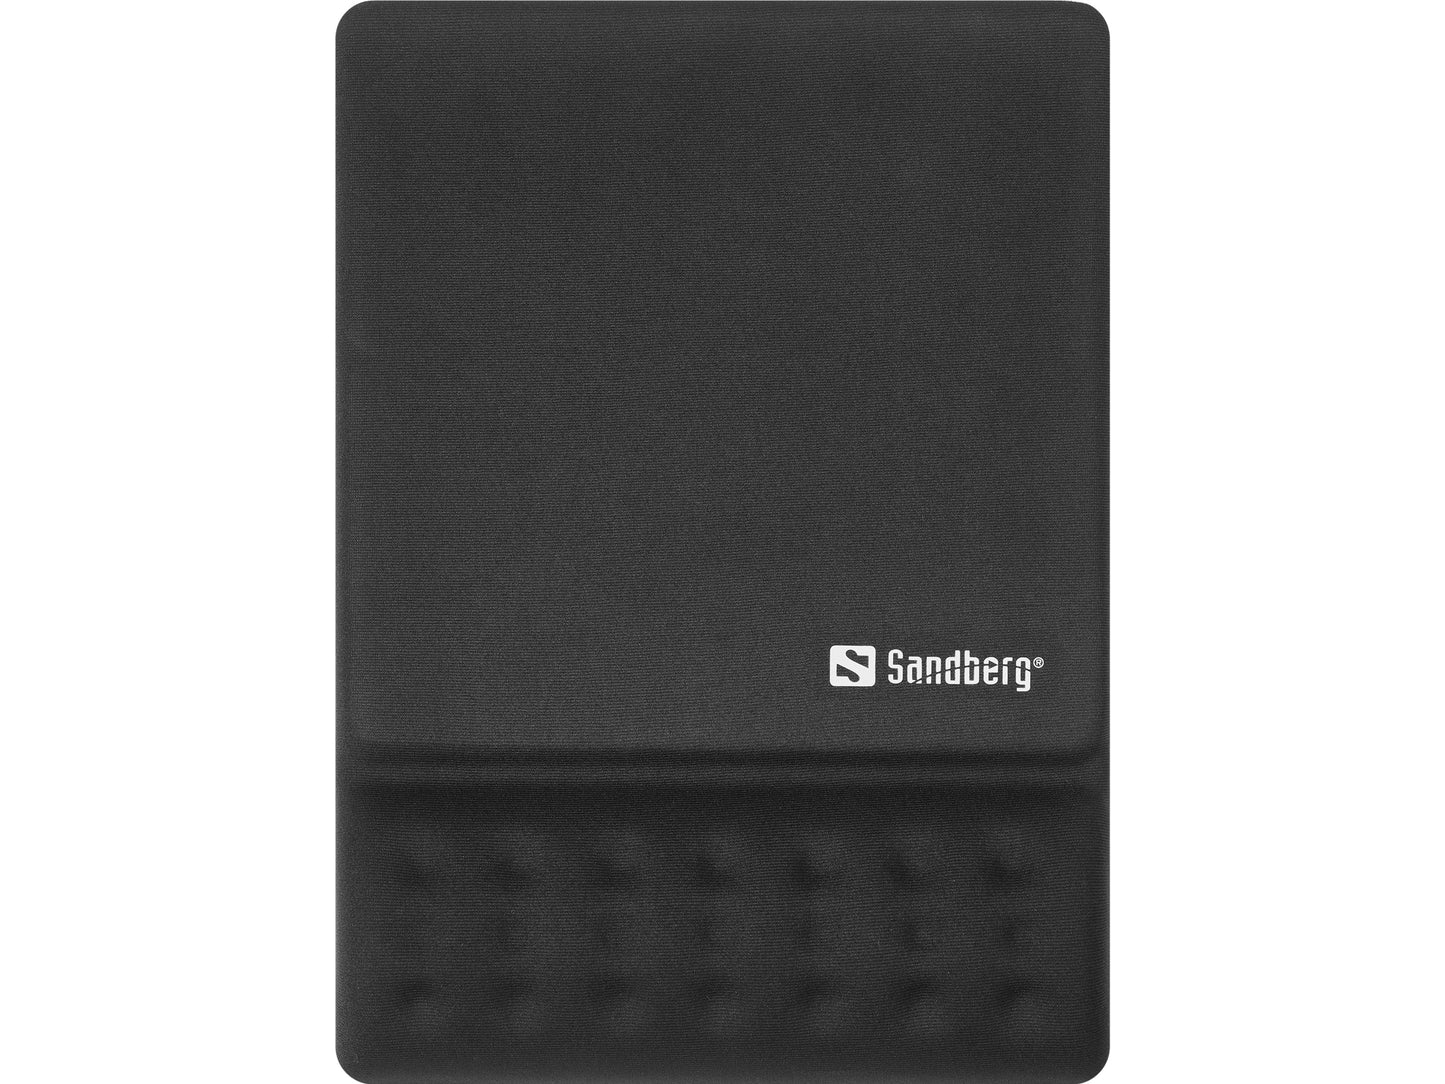 Square mouse pad with memory foam, Sandberg 520-38, with non-slip base